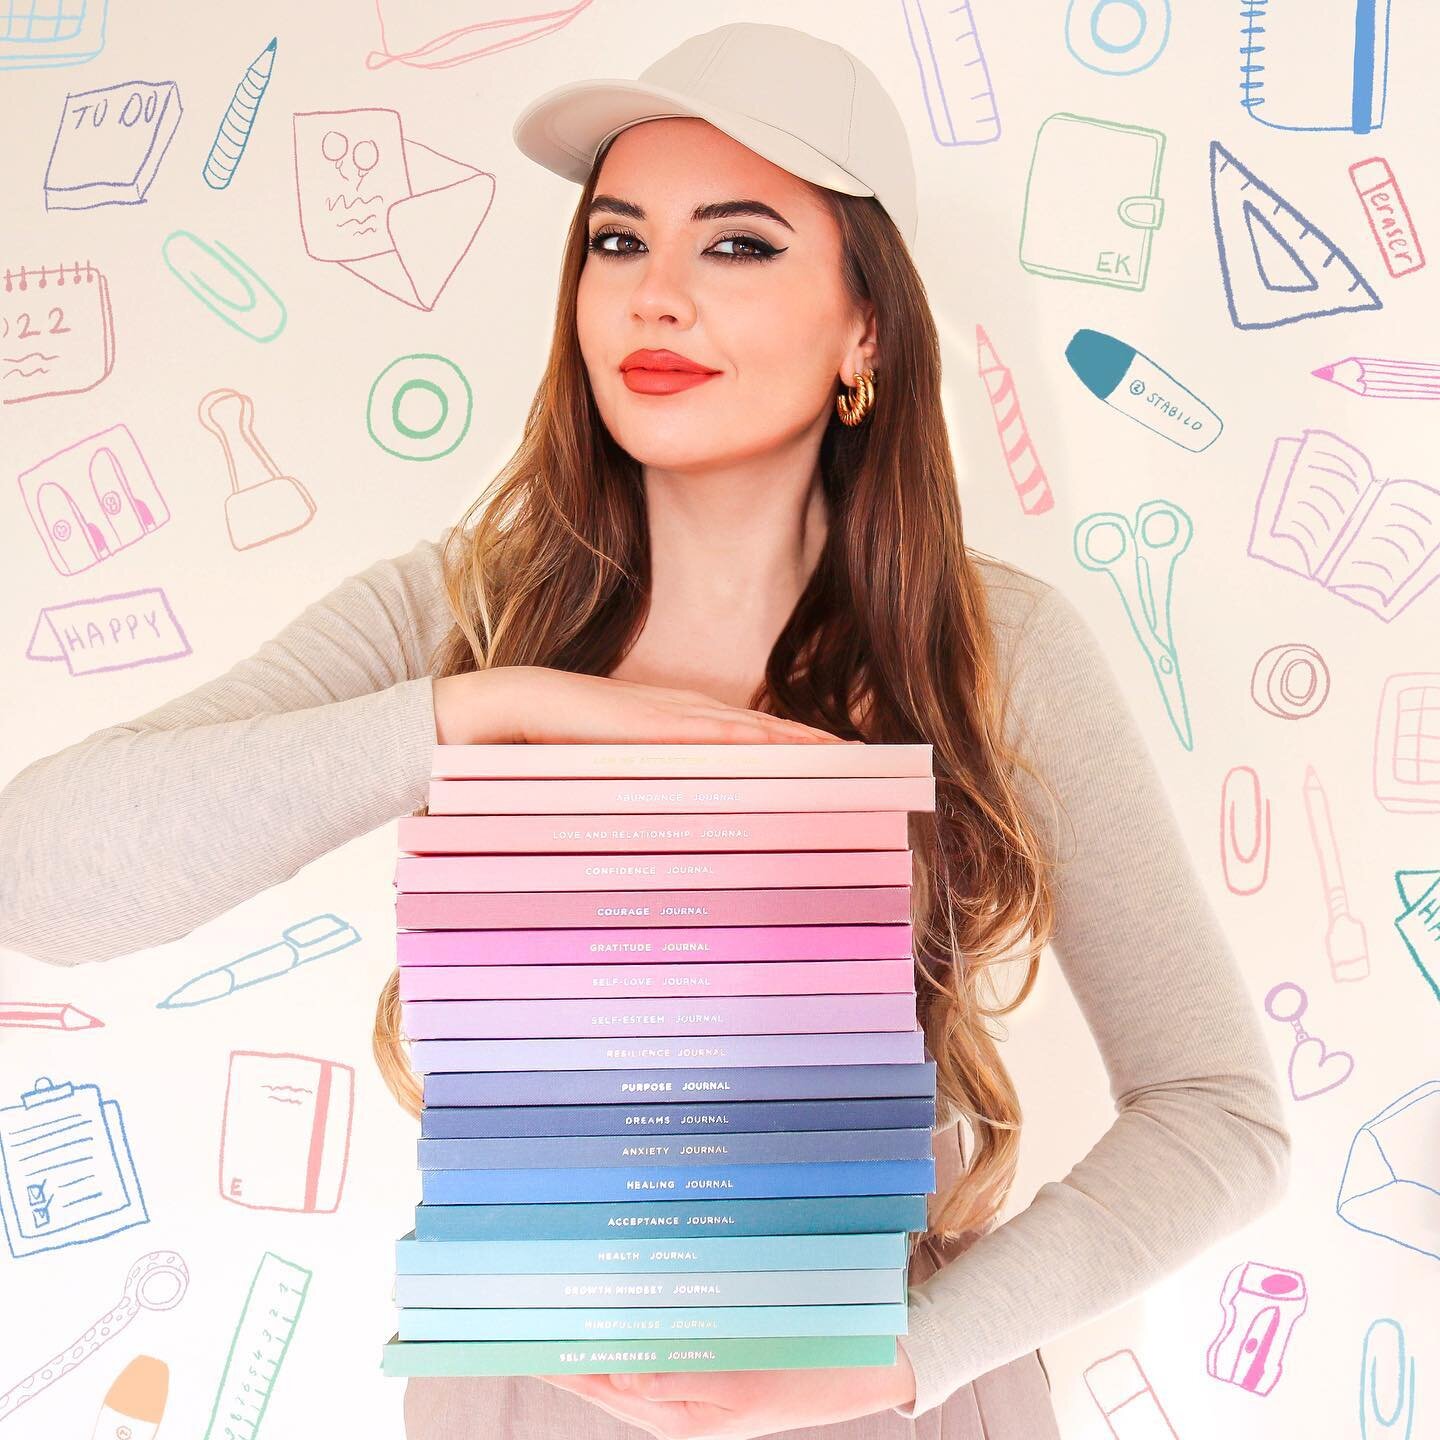 ☀️ Happy #worldstationeryday ☀️

🥂 to another year of designing lots of new stationery products!

📚 Wanna create cool stationery products with me? Let&rsquo;s talk! 💌